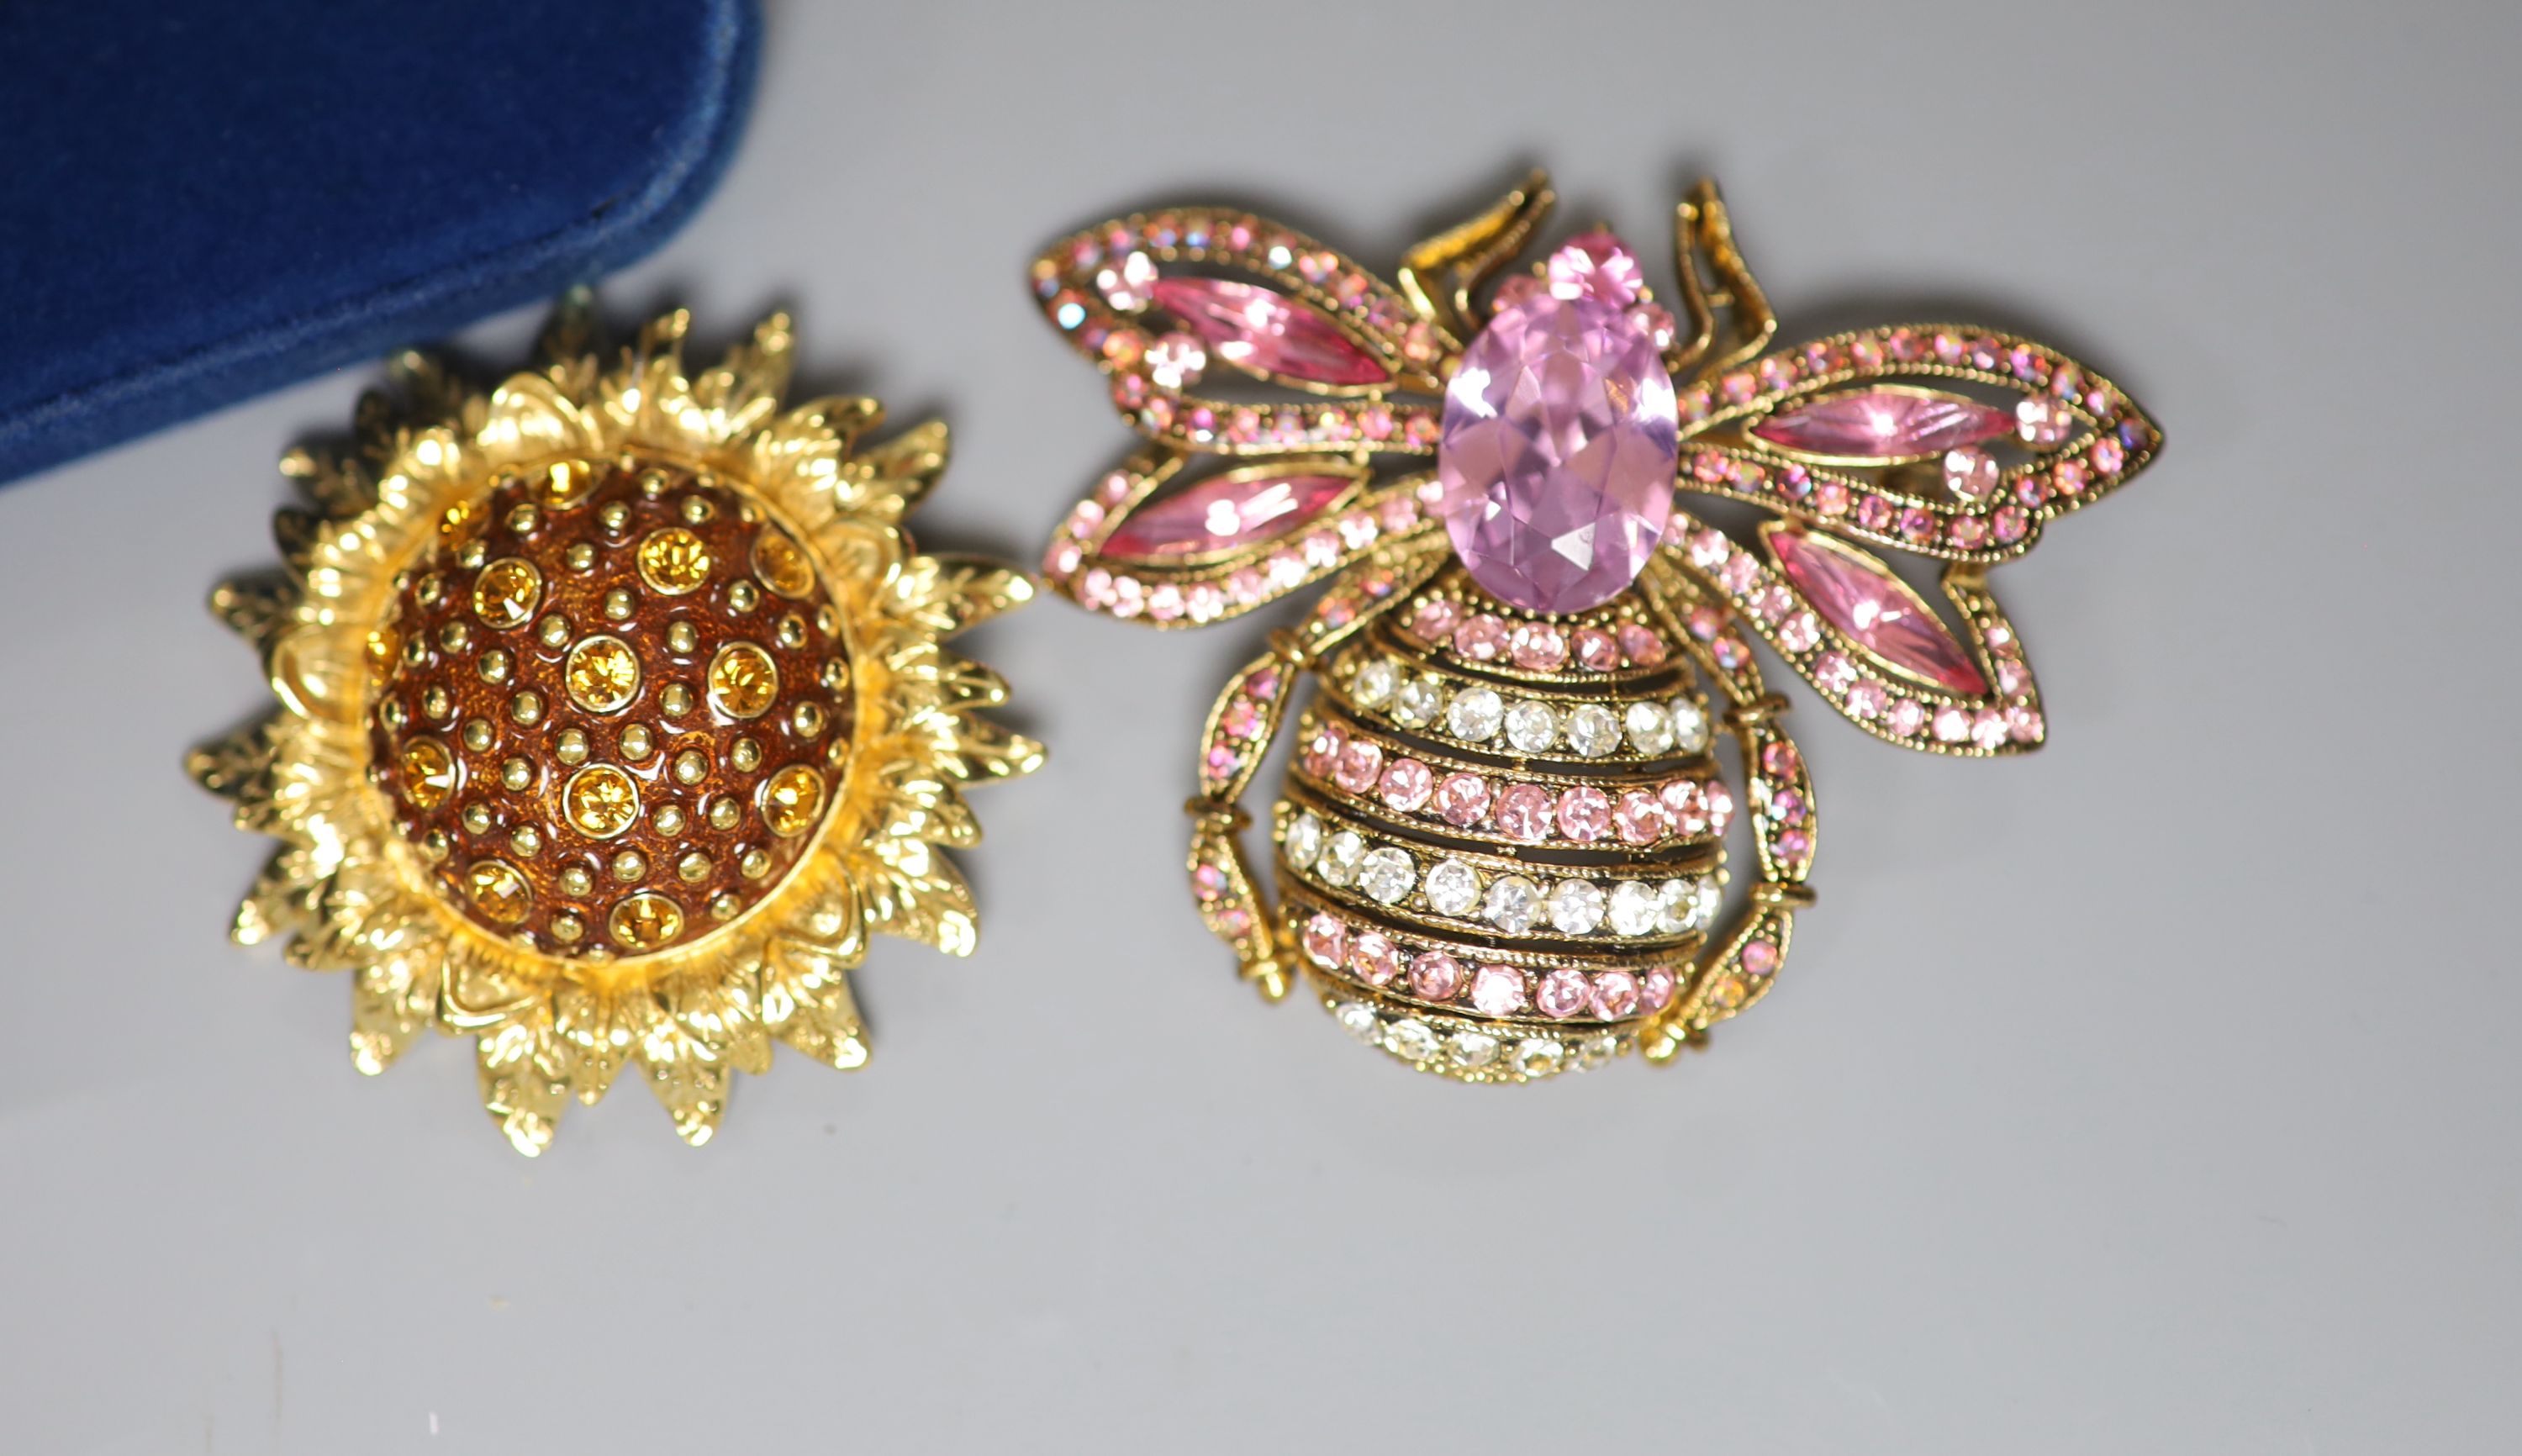 Four items of designer costume jewellery, including a Camrose & Kross 'Jacqueline Kennedy' reproduction flower brooch